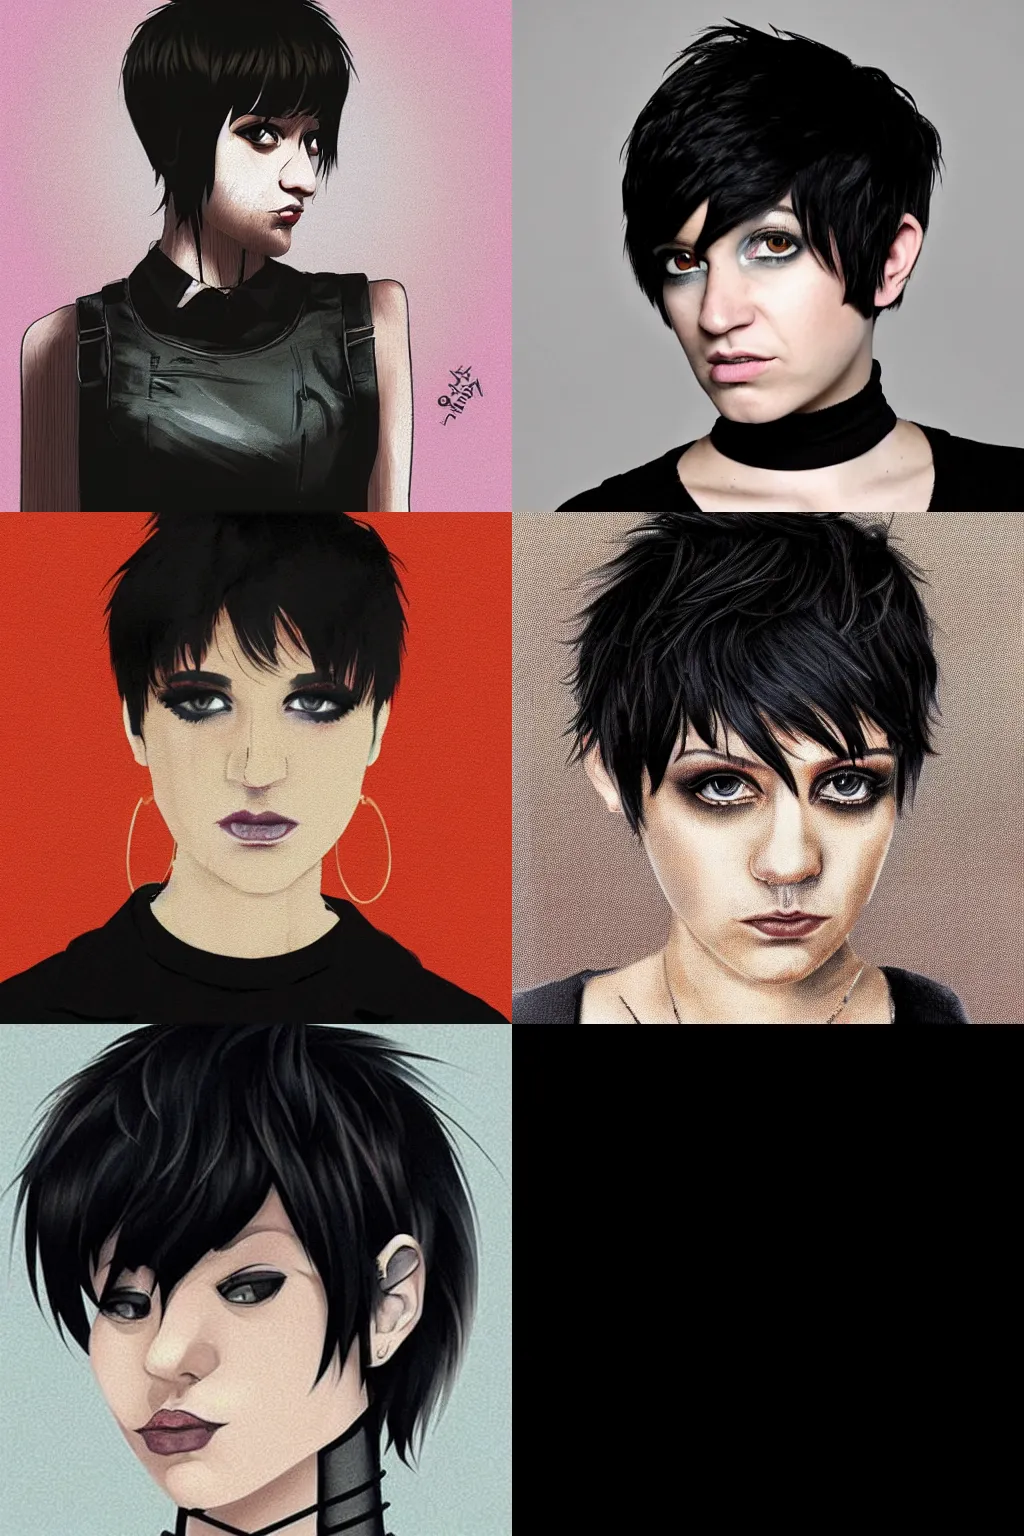 Prompt: an emo portrait by petros afshar. her hair is dark brown and cut into a short, messy pixie cut. she has a slightly rounded face, with a pointed chin, large entirely - black eyes, and a small nose. she is wearing a black tank top, a black leather jacket, a black knee - length skirt, and a black choker..